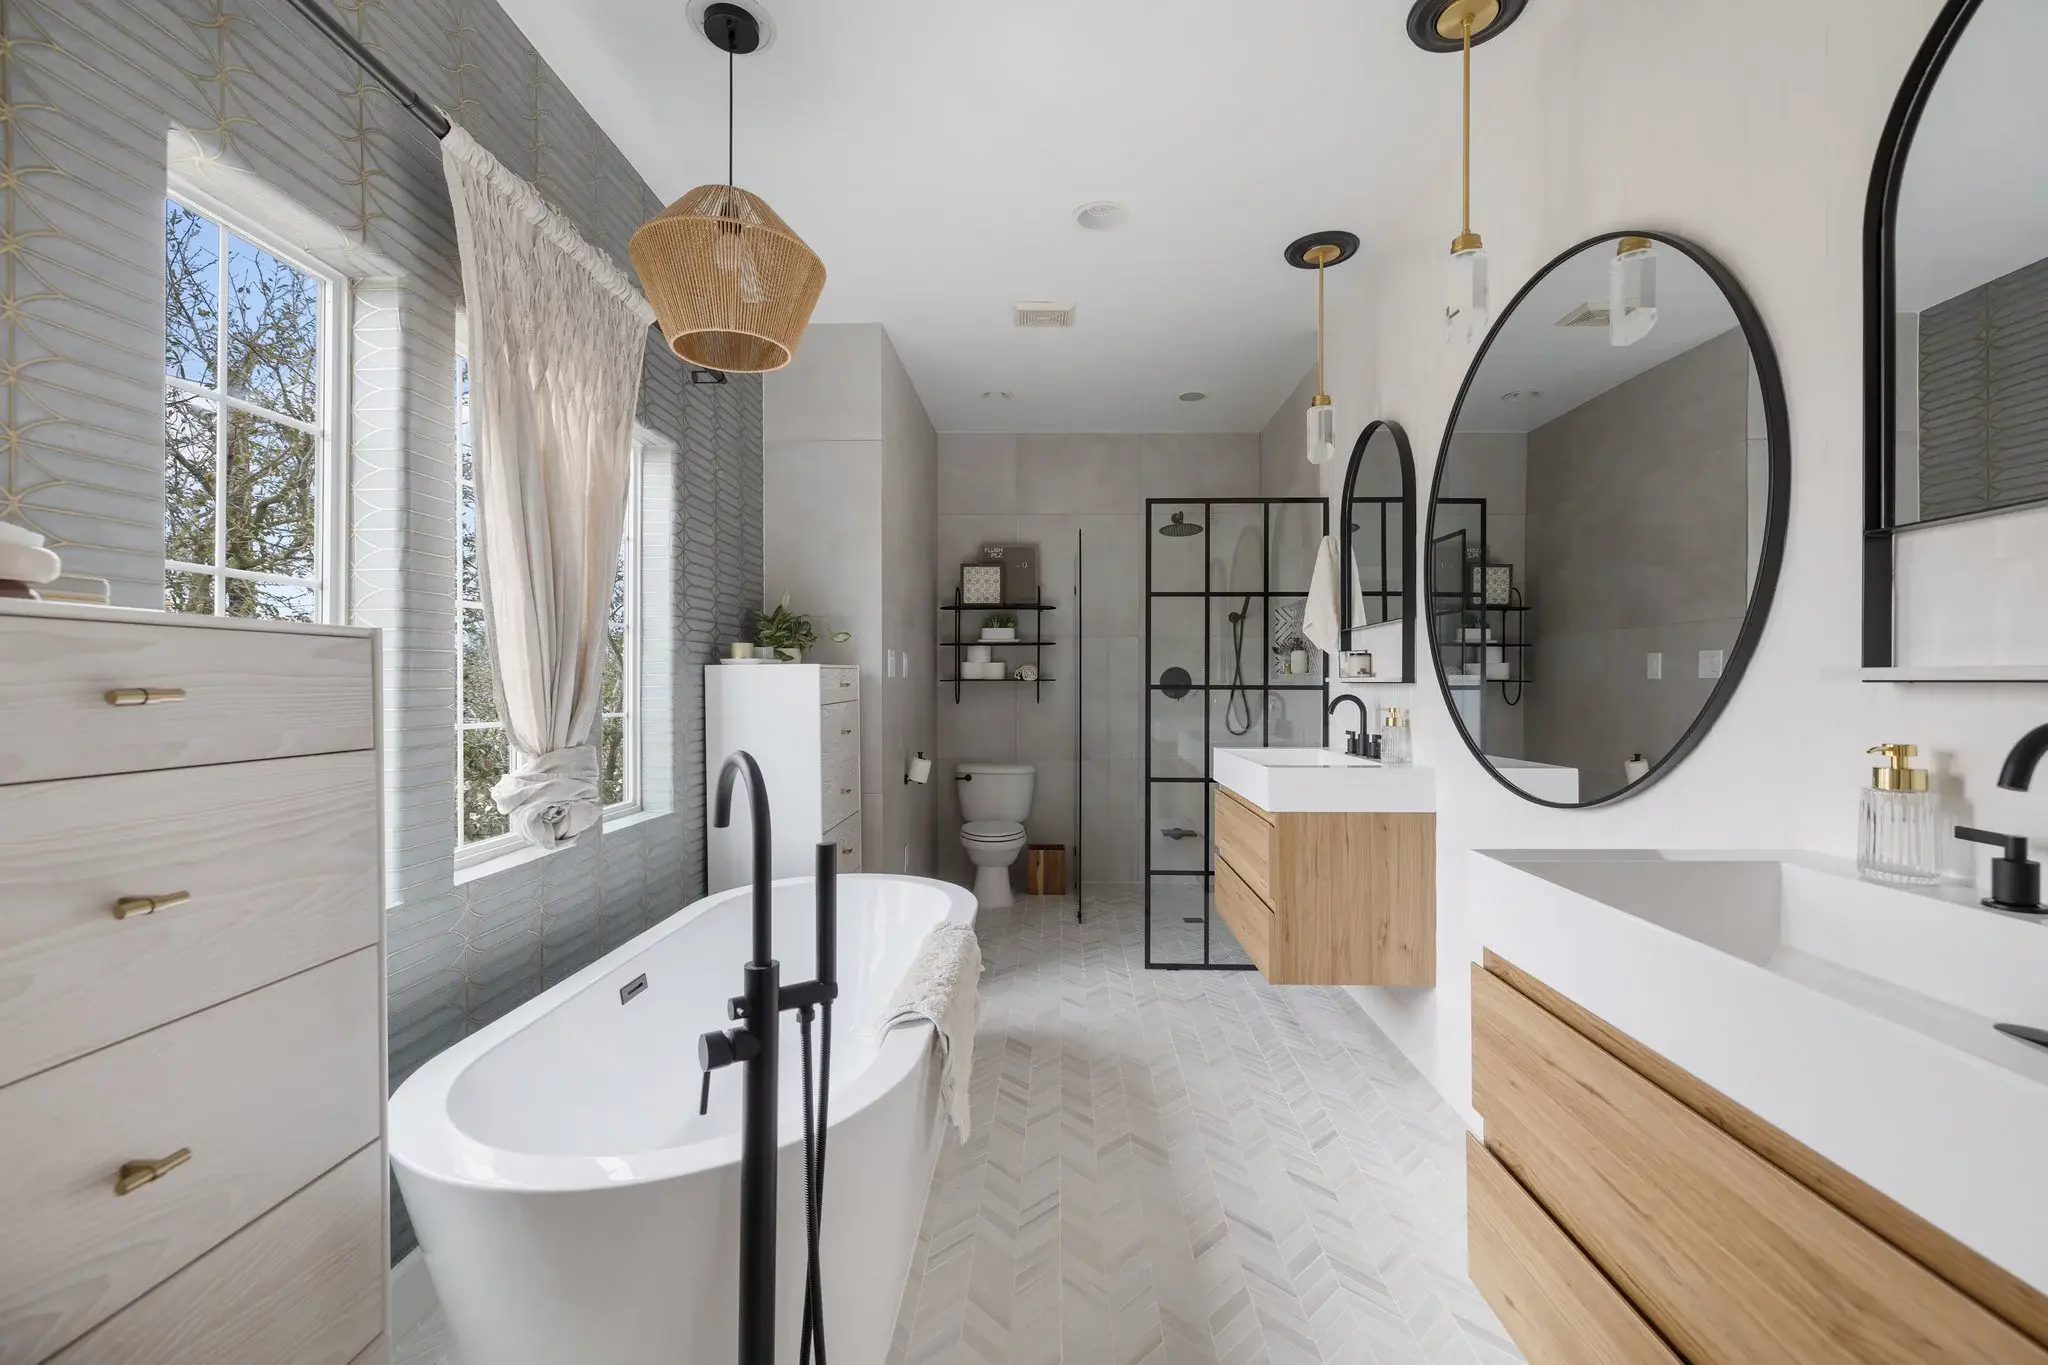 A Softer Look for a Bathroom Remodel in Houston